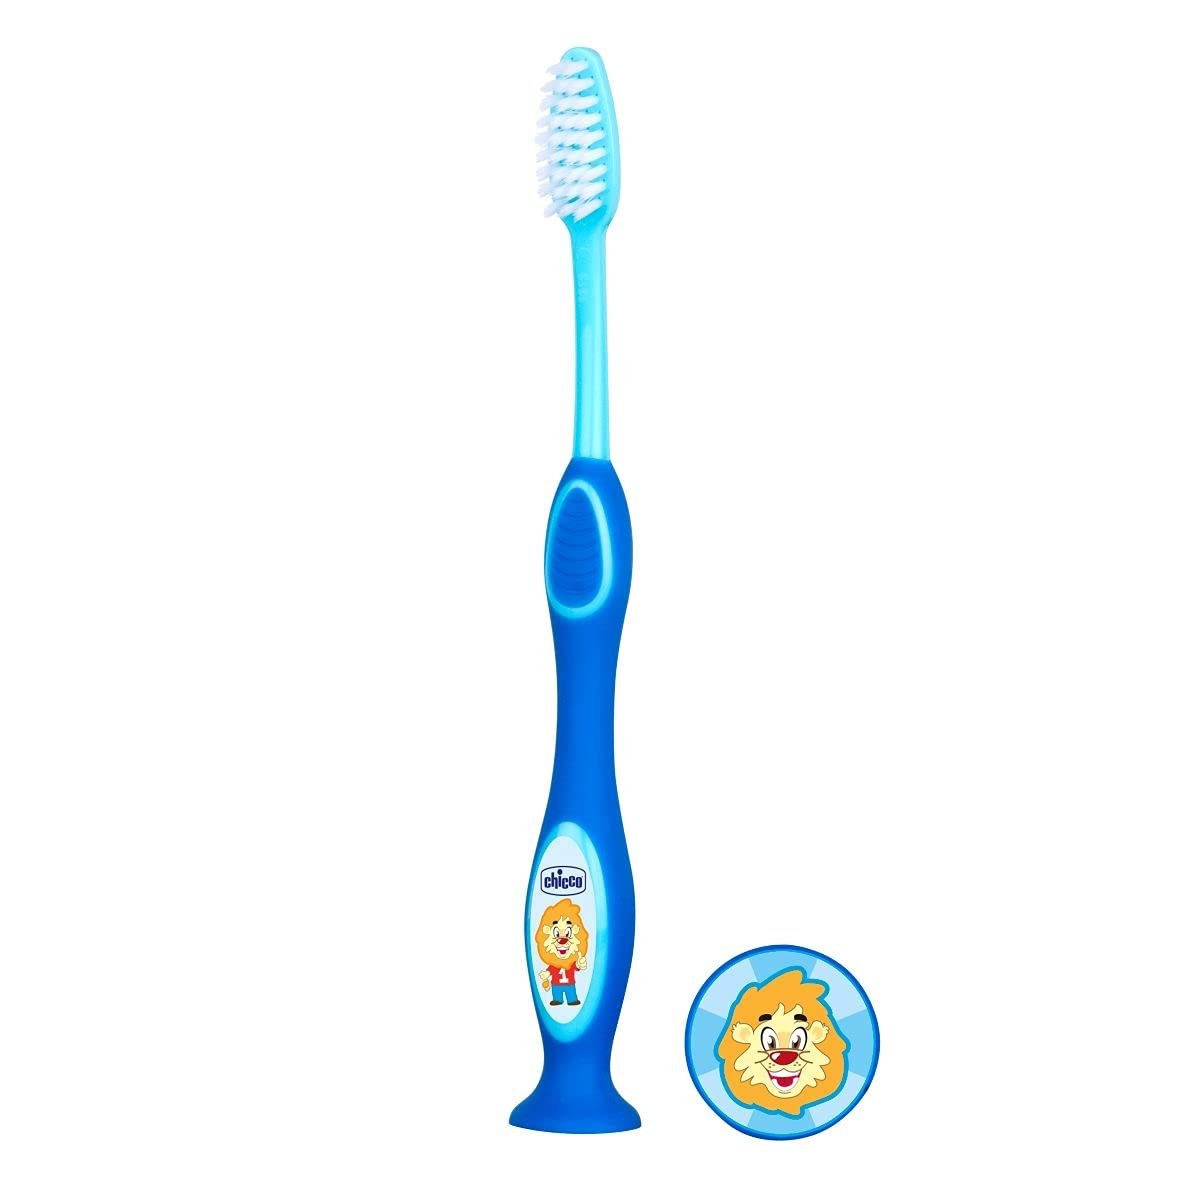 Chicco Manual Toothbrush For Kids,Blue,Pack of 1